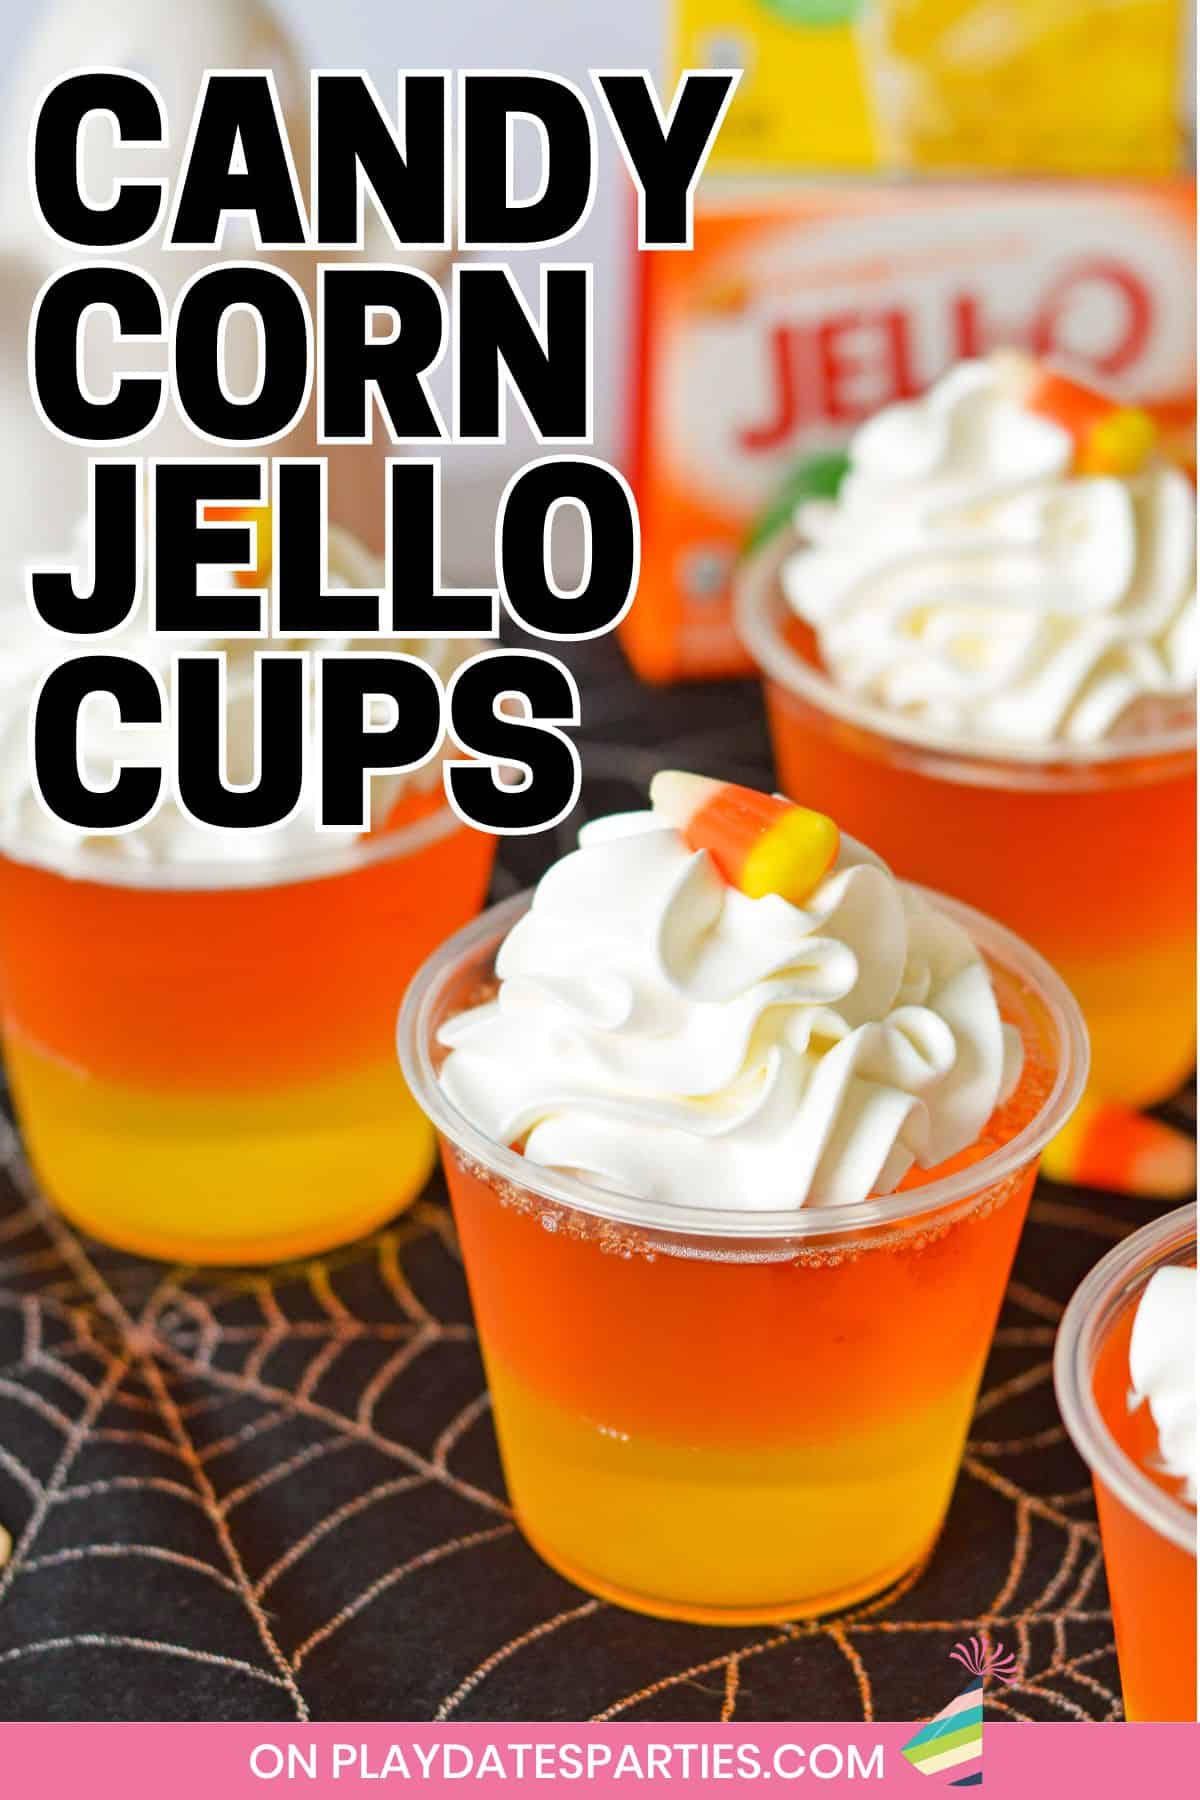 Layered jello cups with text overlay candy corn jello cups.